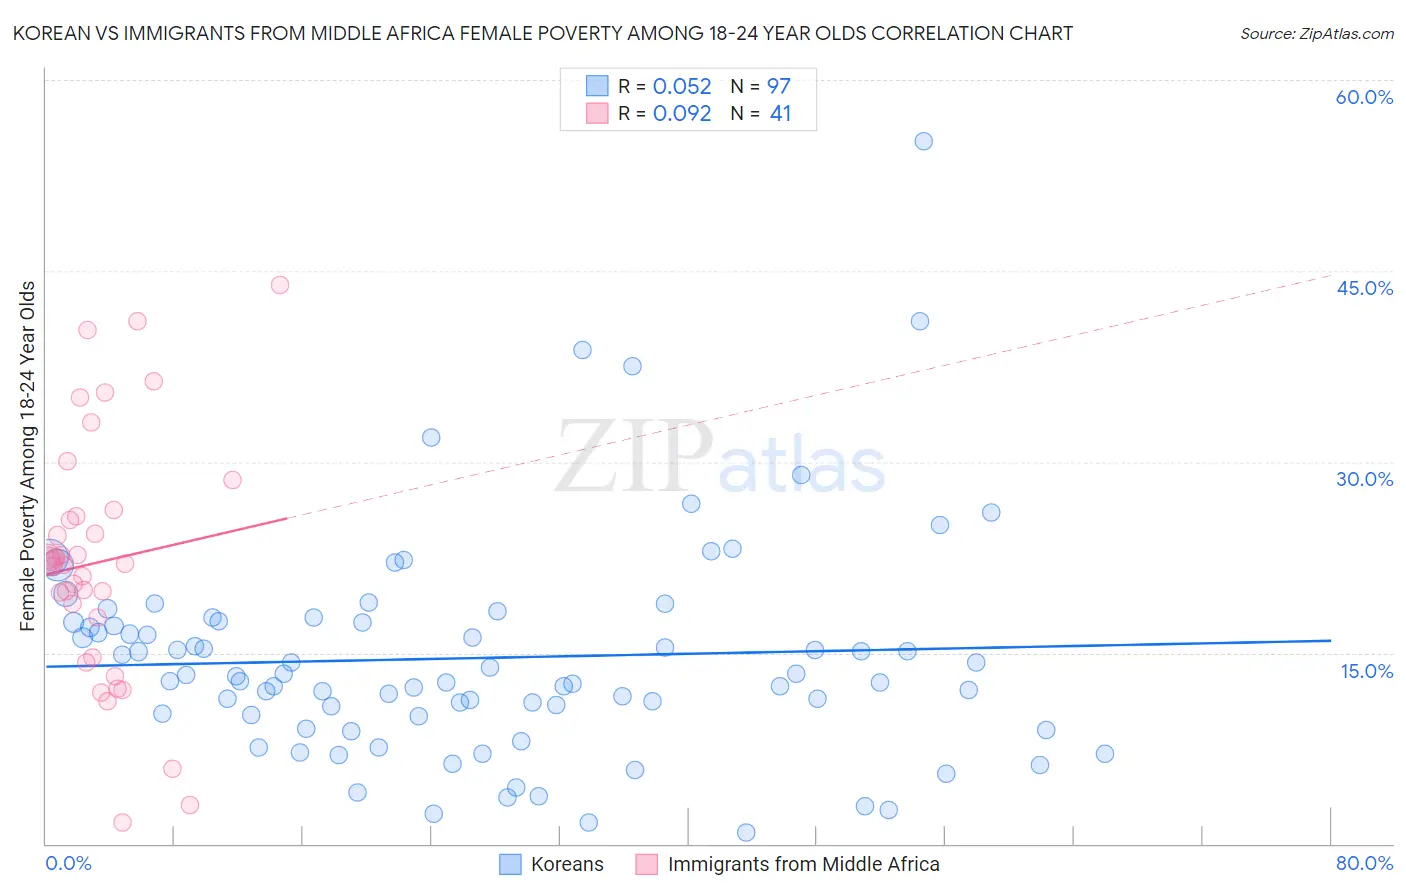 Korean vs Immigrants from Middle Africa Female Poverty Among 18-24 Year Olds